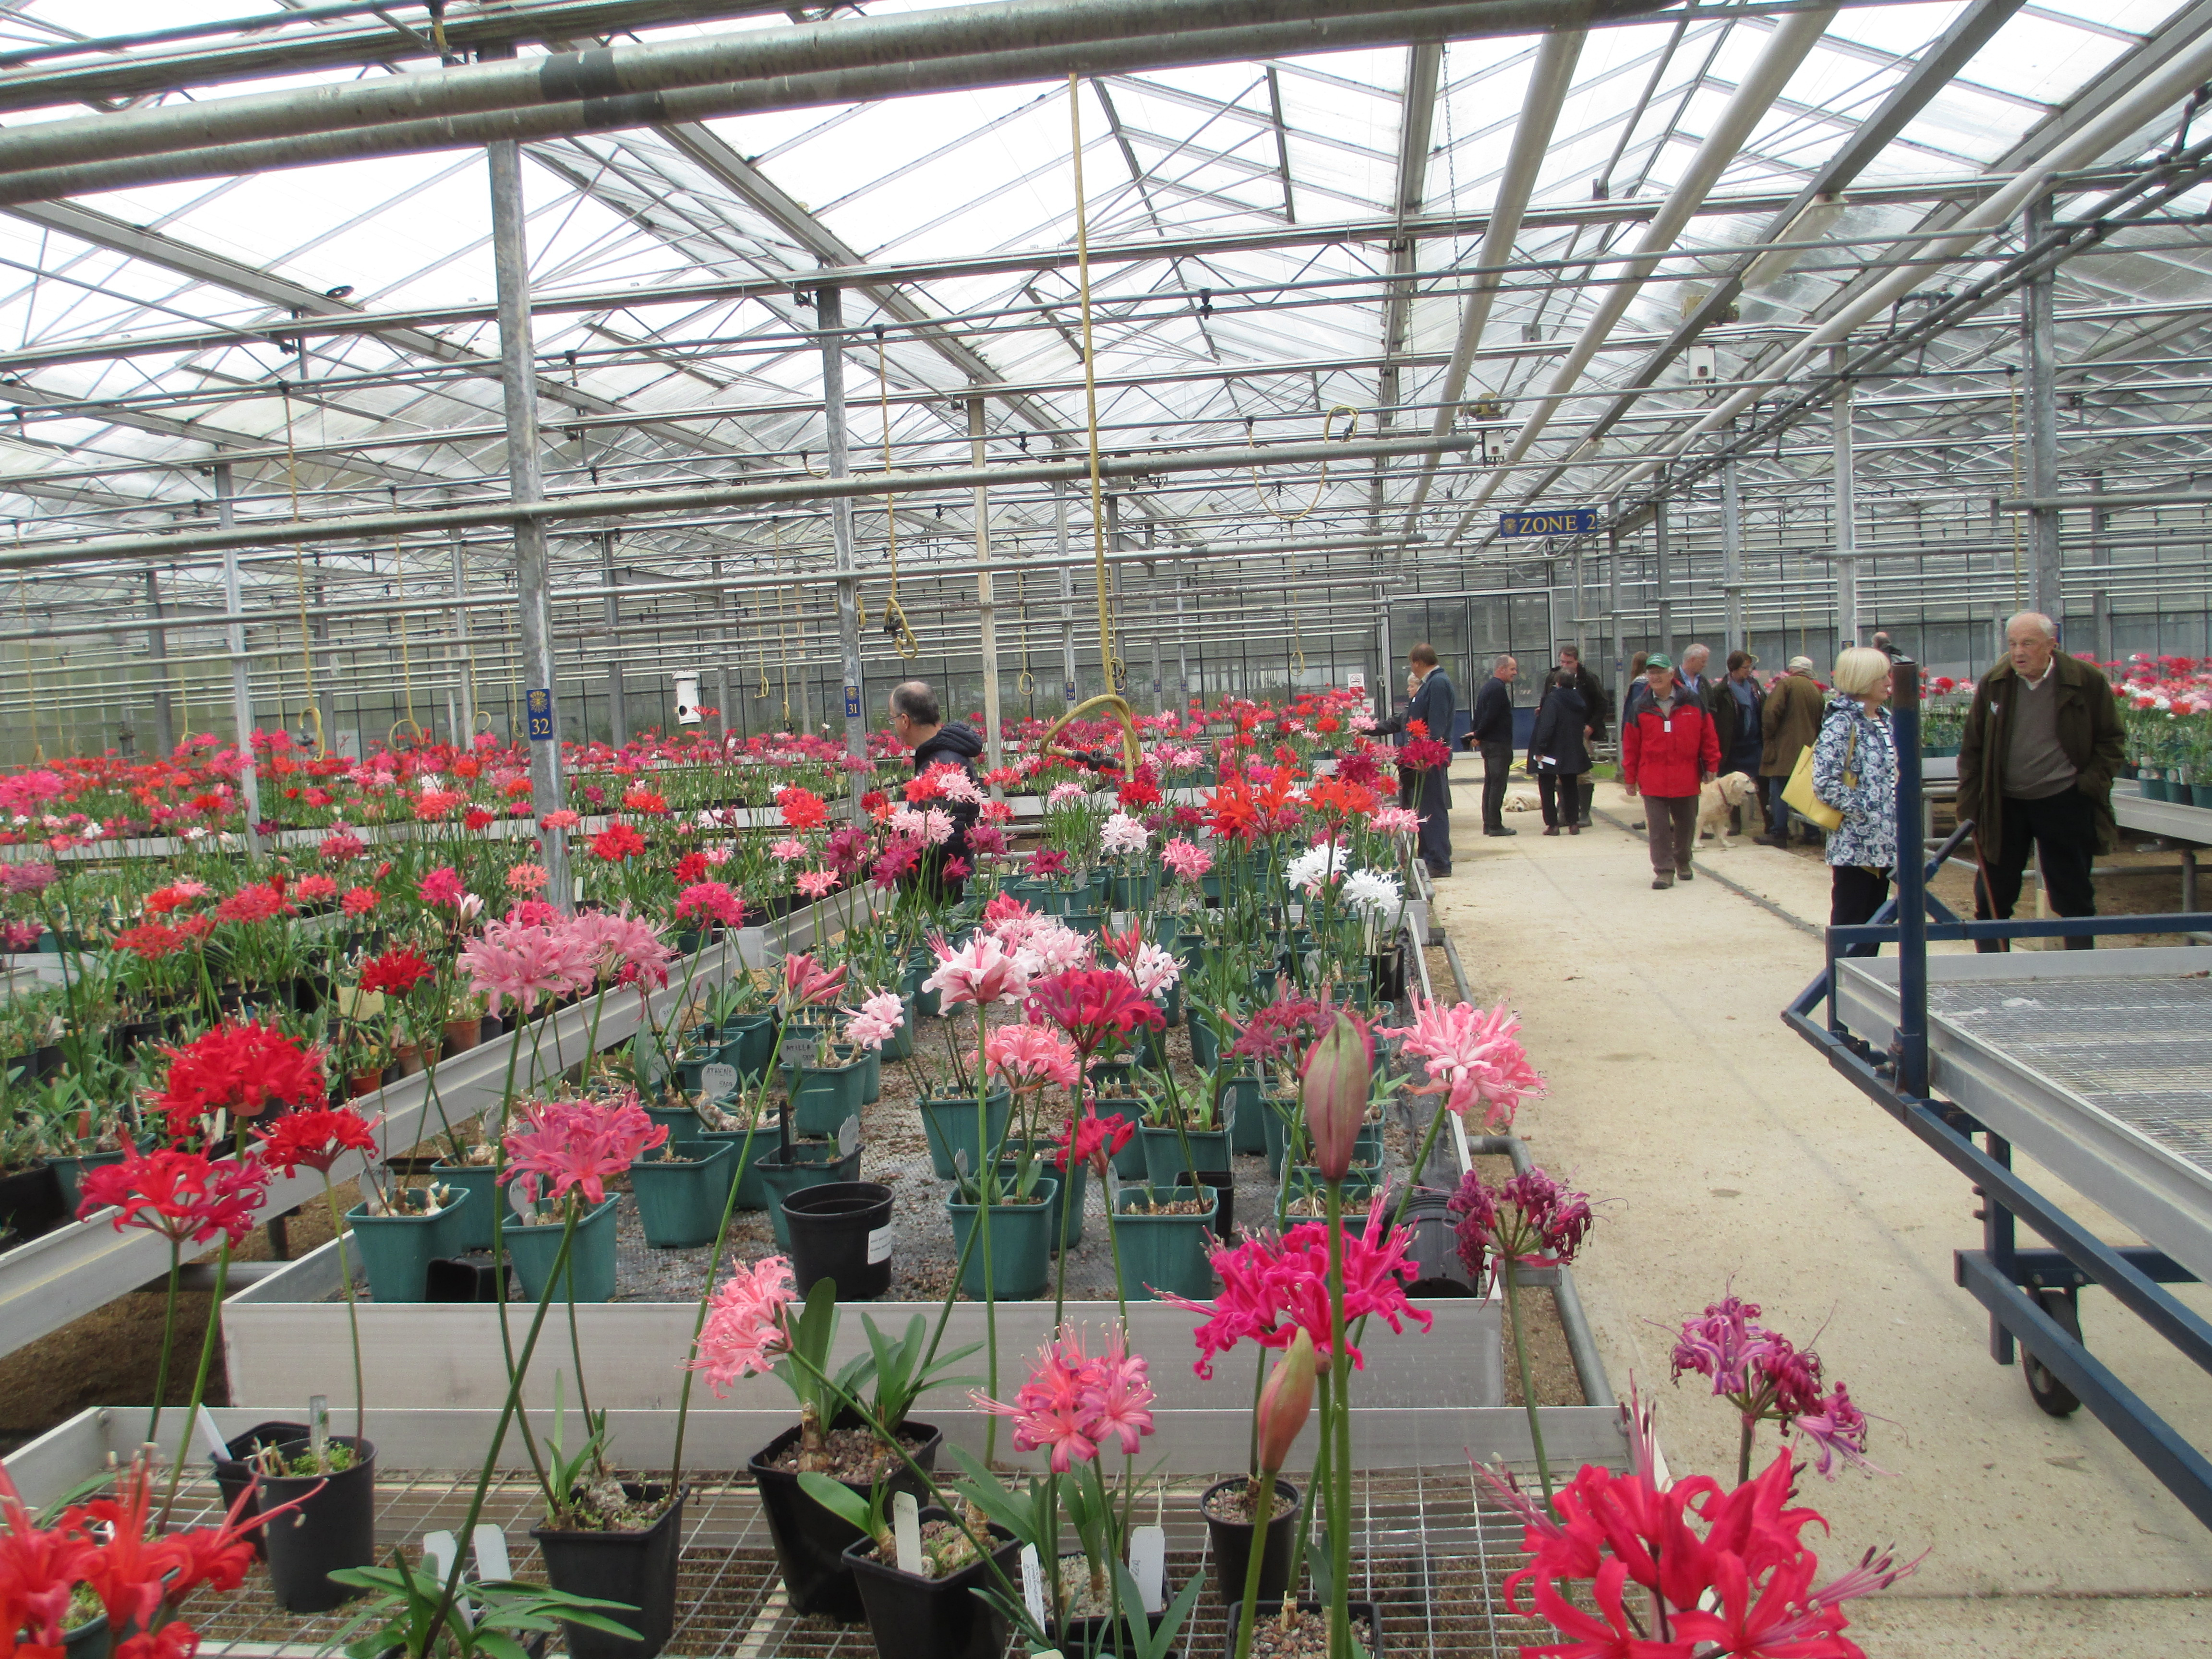 Members enjoying a visit to the glasshouse to view blooms of new varieties being developed, as well as old favourites. 